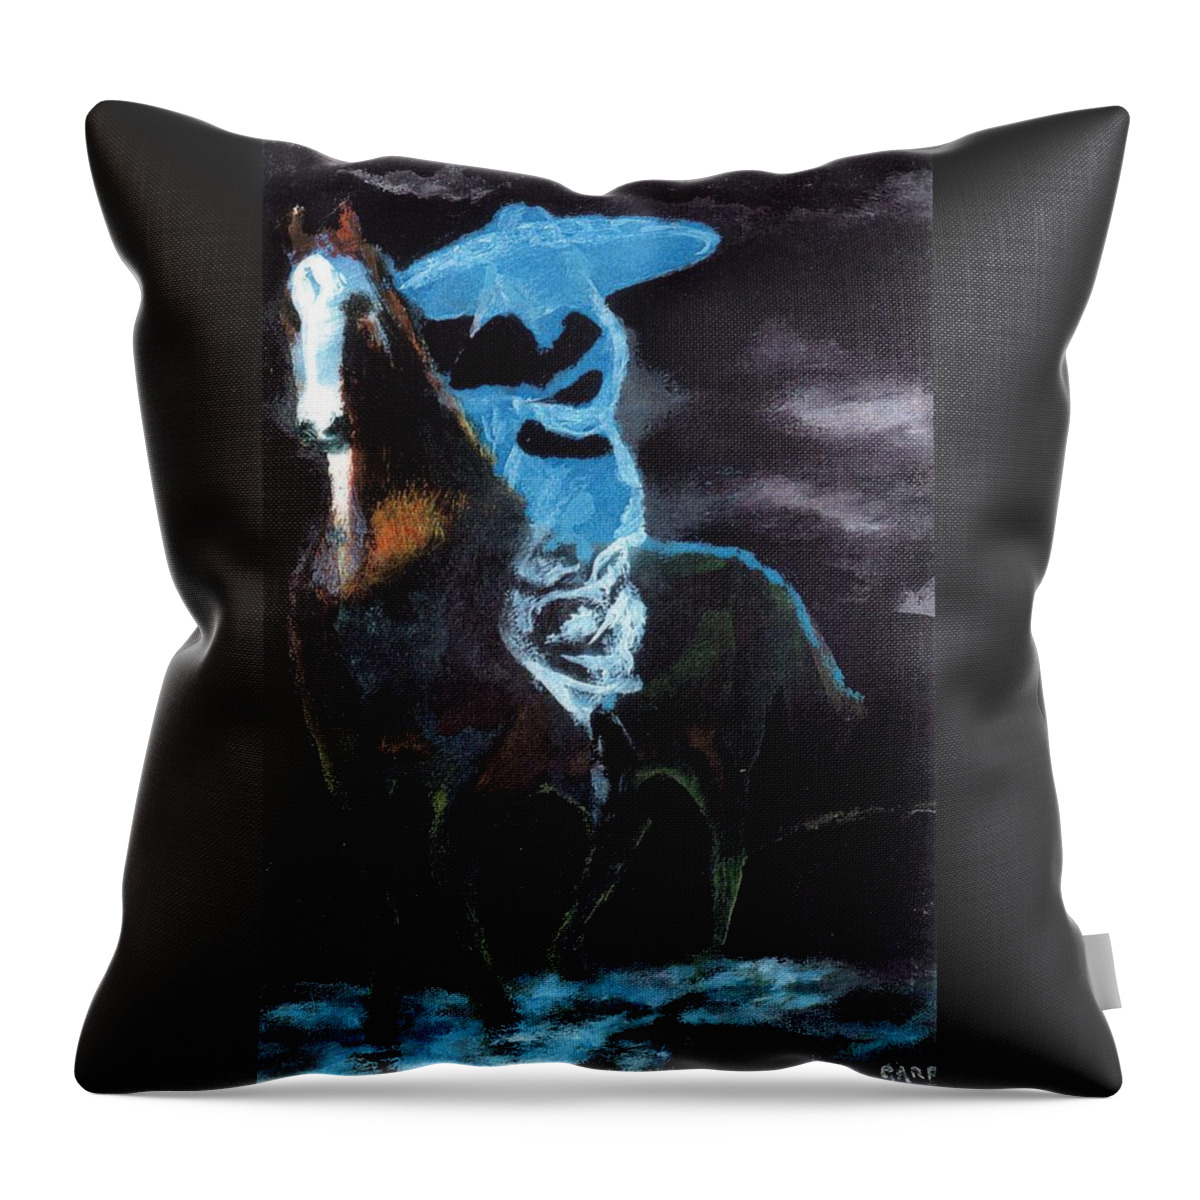 Horse Throw Pillow featuring the painting Amazzone notturna by Enrico Garff